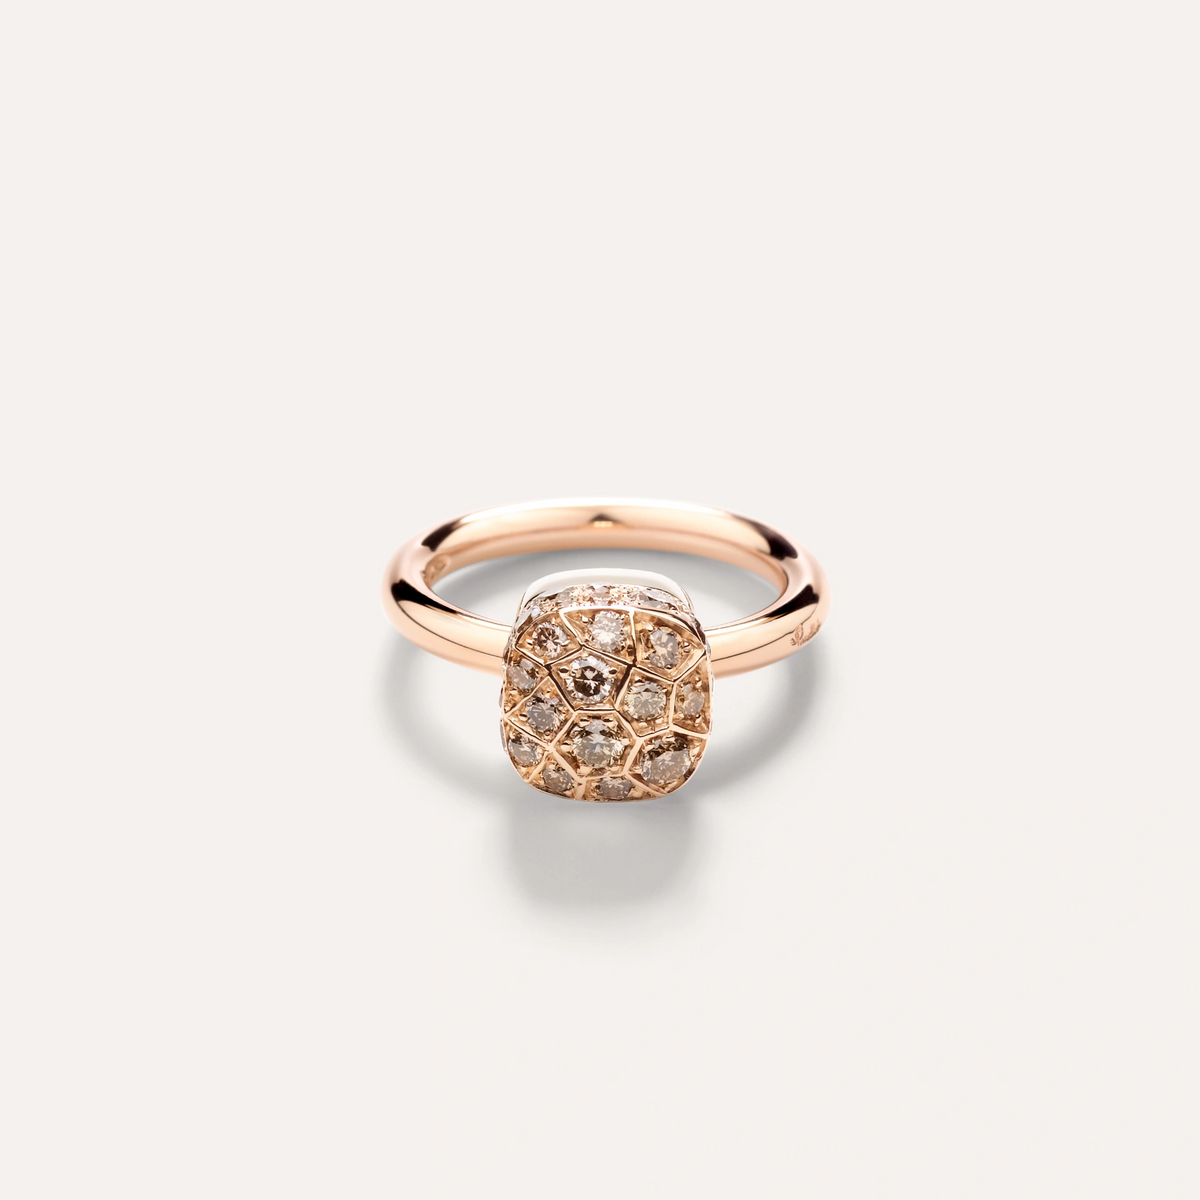 Pomellato Ring in 18k Rose and White Gold with Brown Diamonds from the Nudo collection 